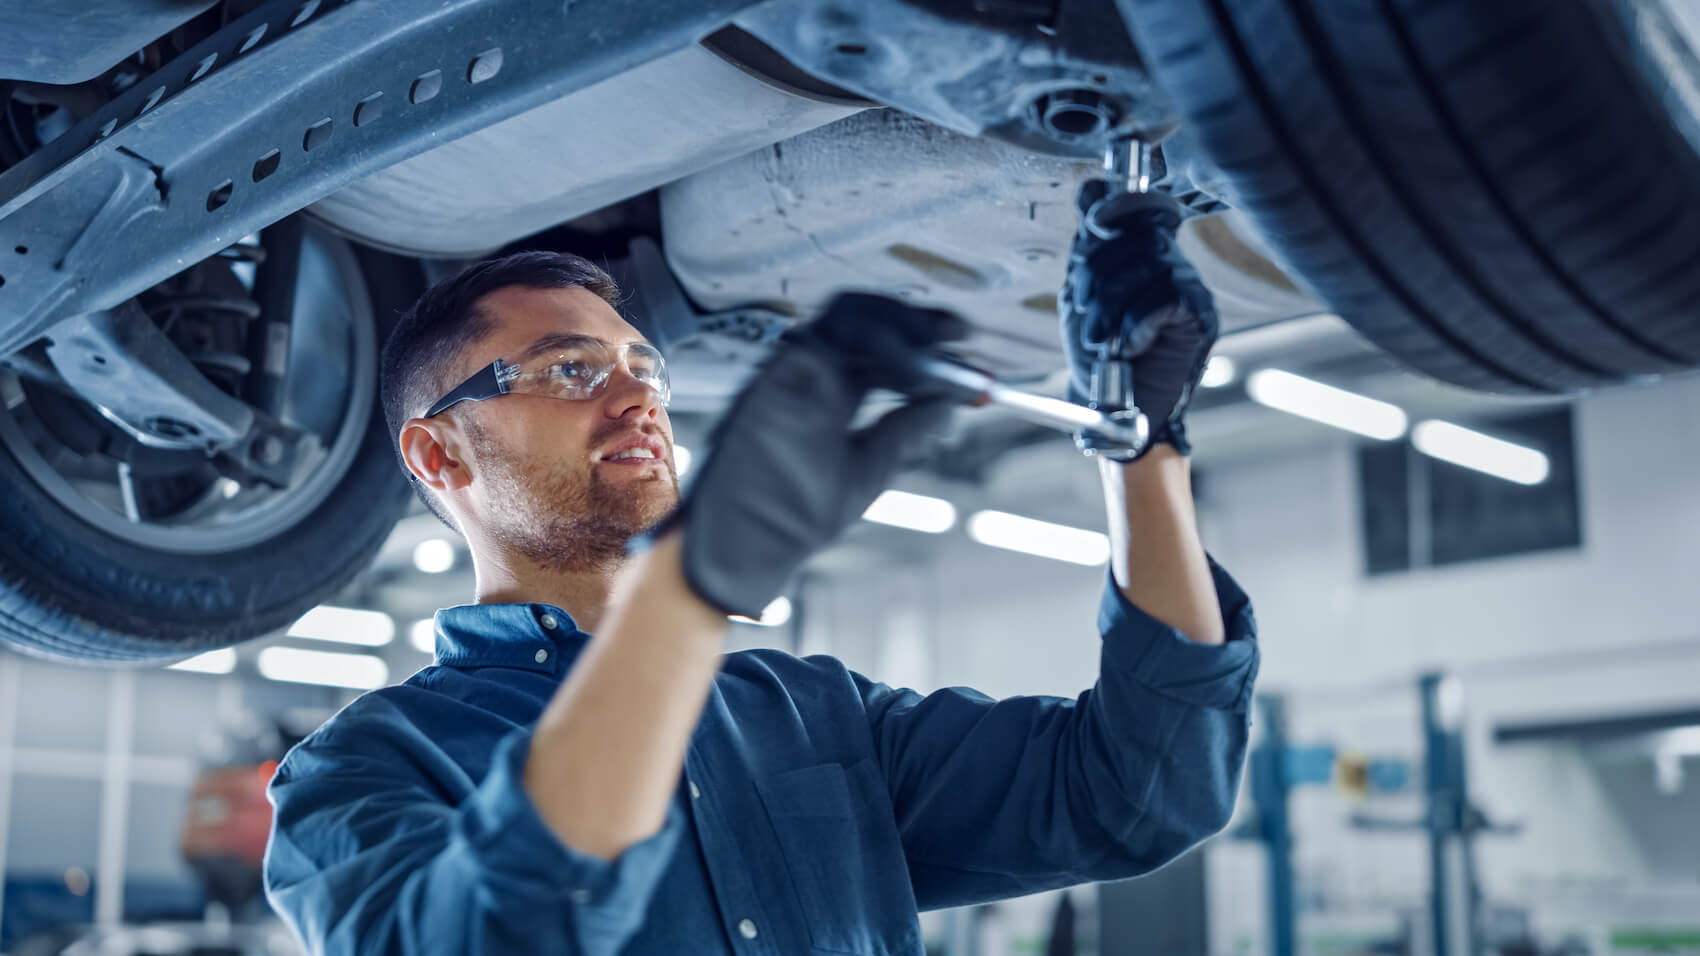 What Types of Maintenance Does Our Chevy Service Center Offer?